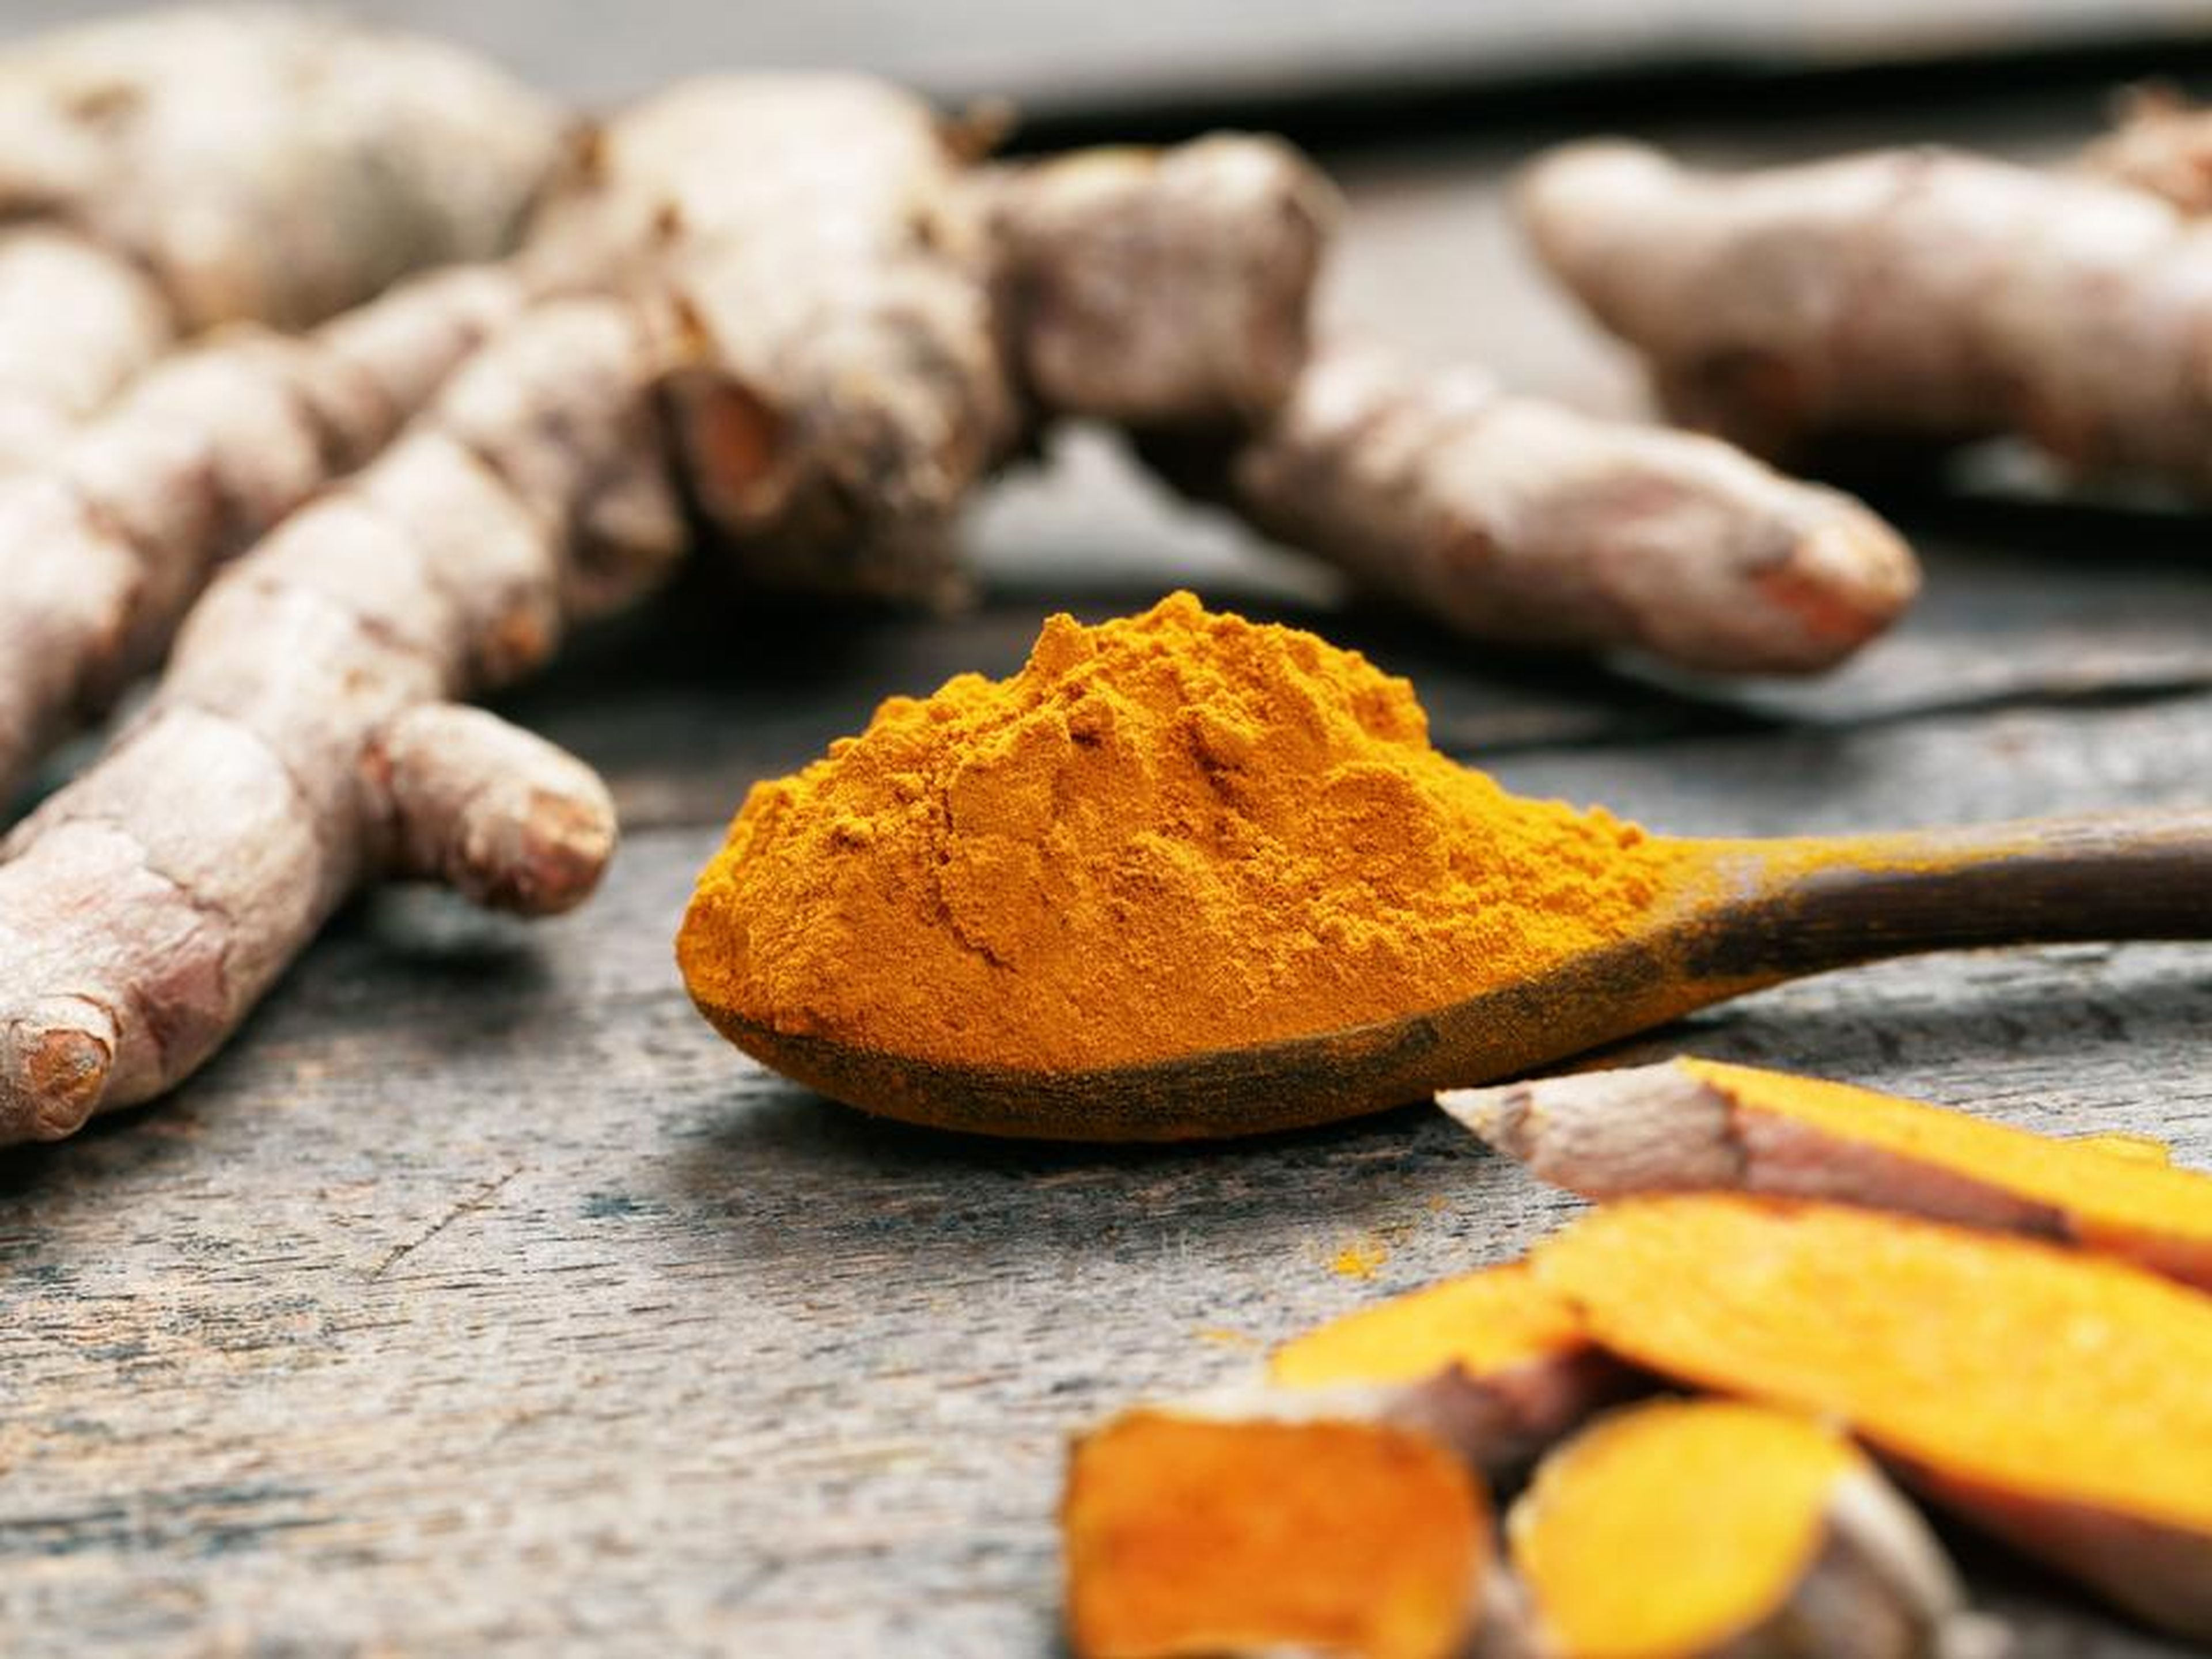 There's some evidence that eating more of certain foods, like turmeric, could help.